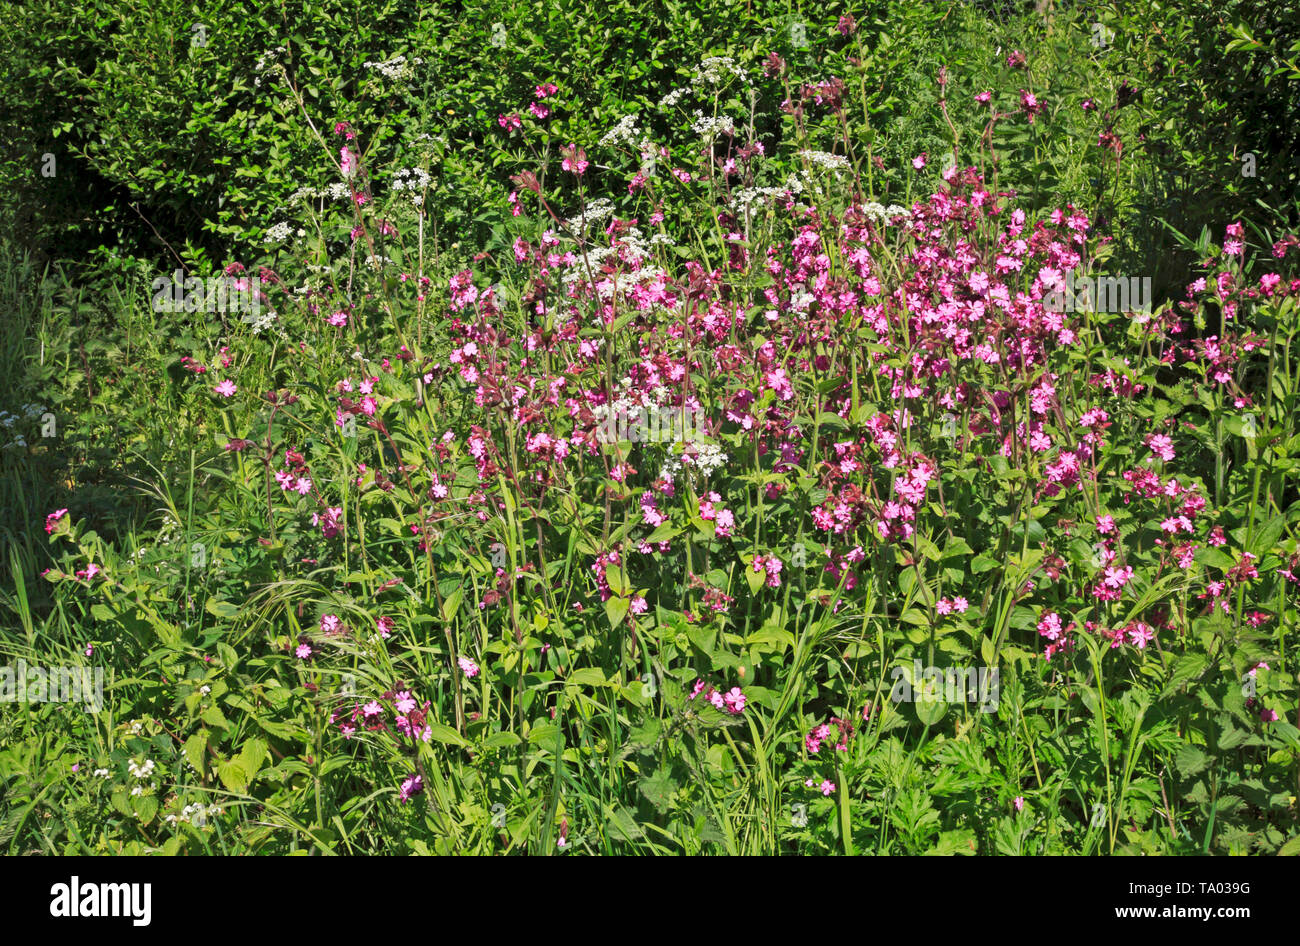 A group of wild flowers, primarily Red Campion, by the Weavers' Way long distance path at Felmingham, Norfolk, England, United Kingdom, Europe. Stock Photo